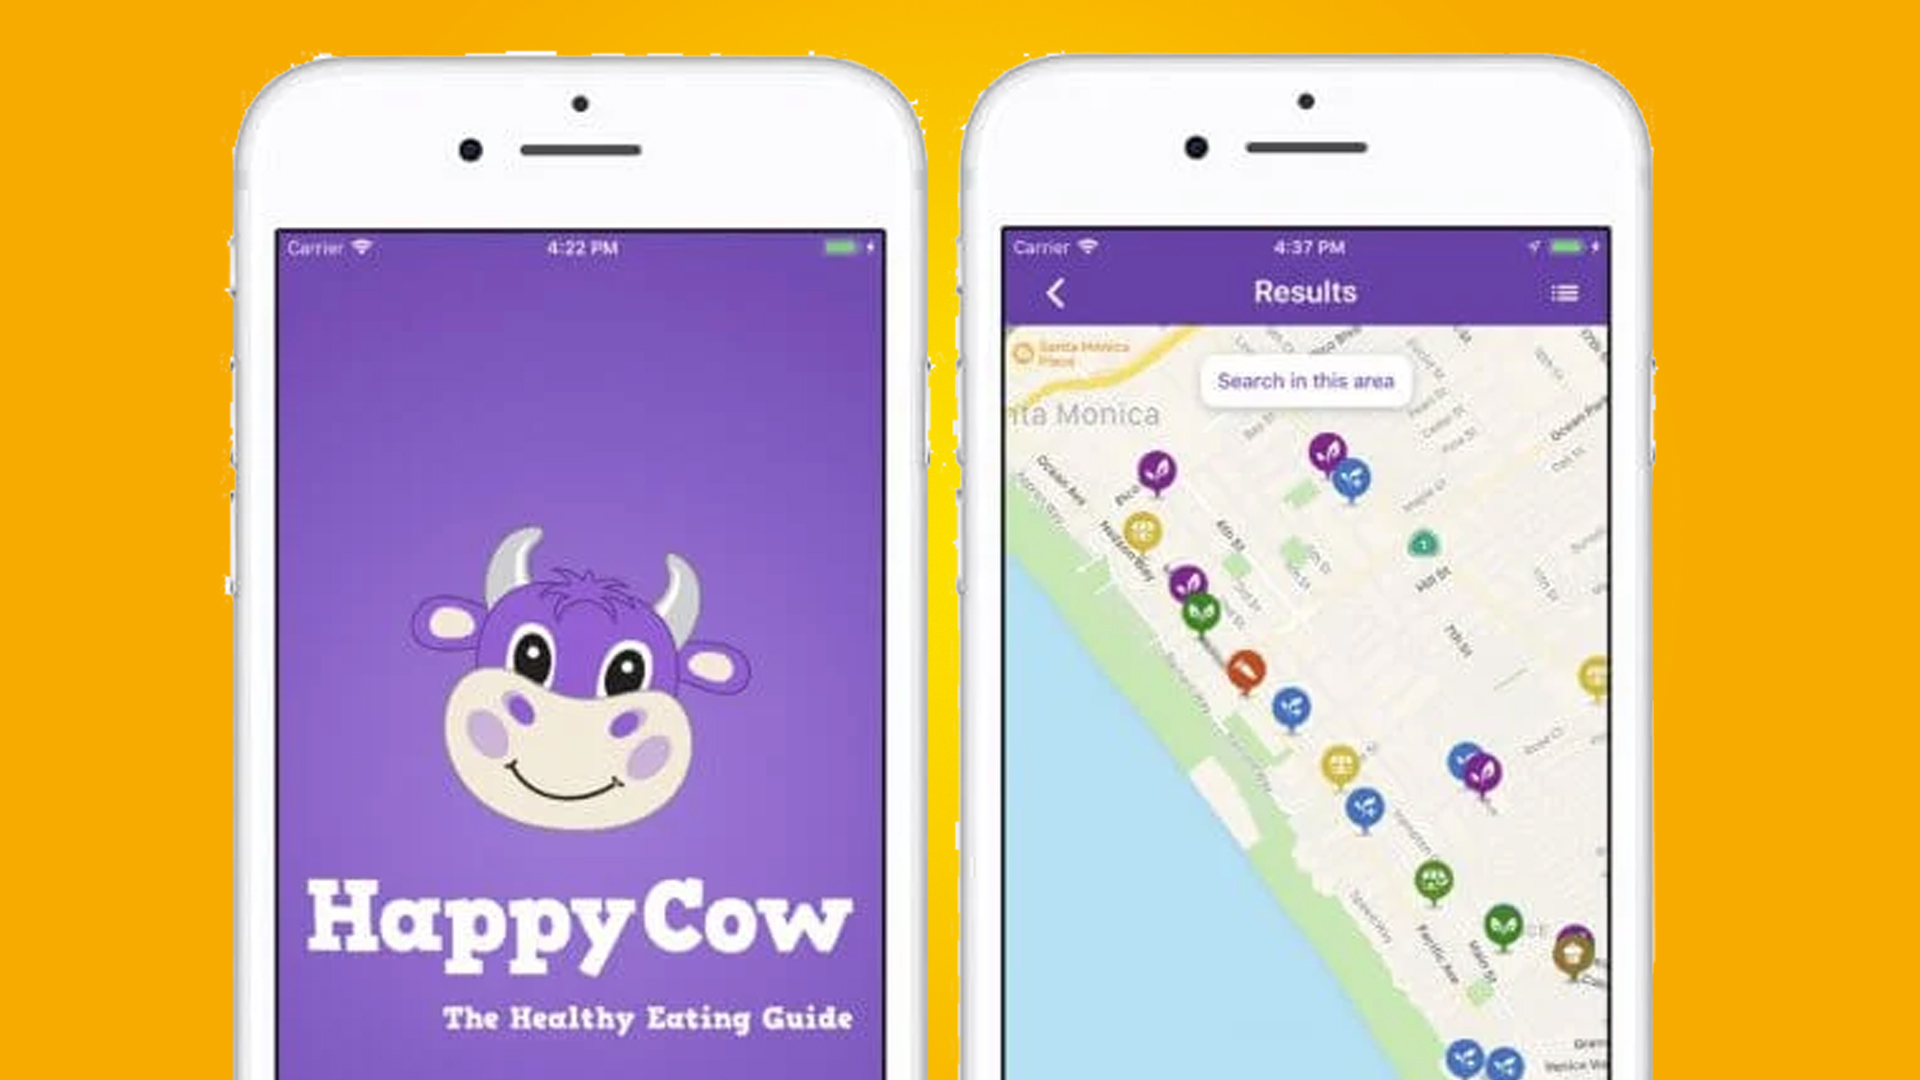 Two phones on an orange background showing the HappyCow app